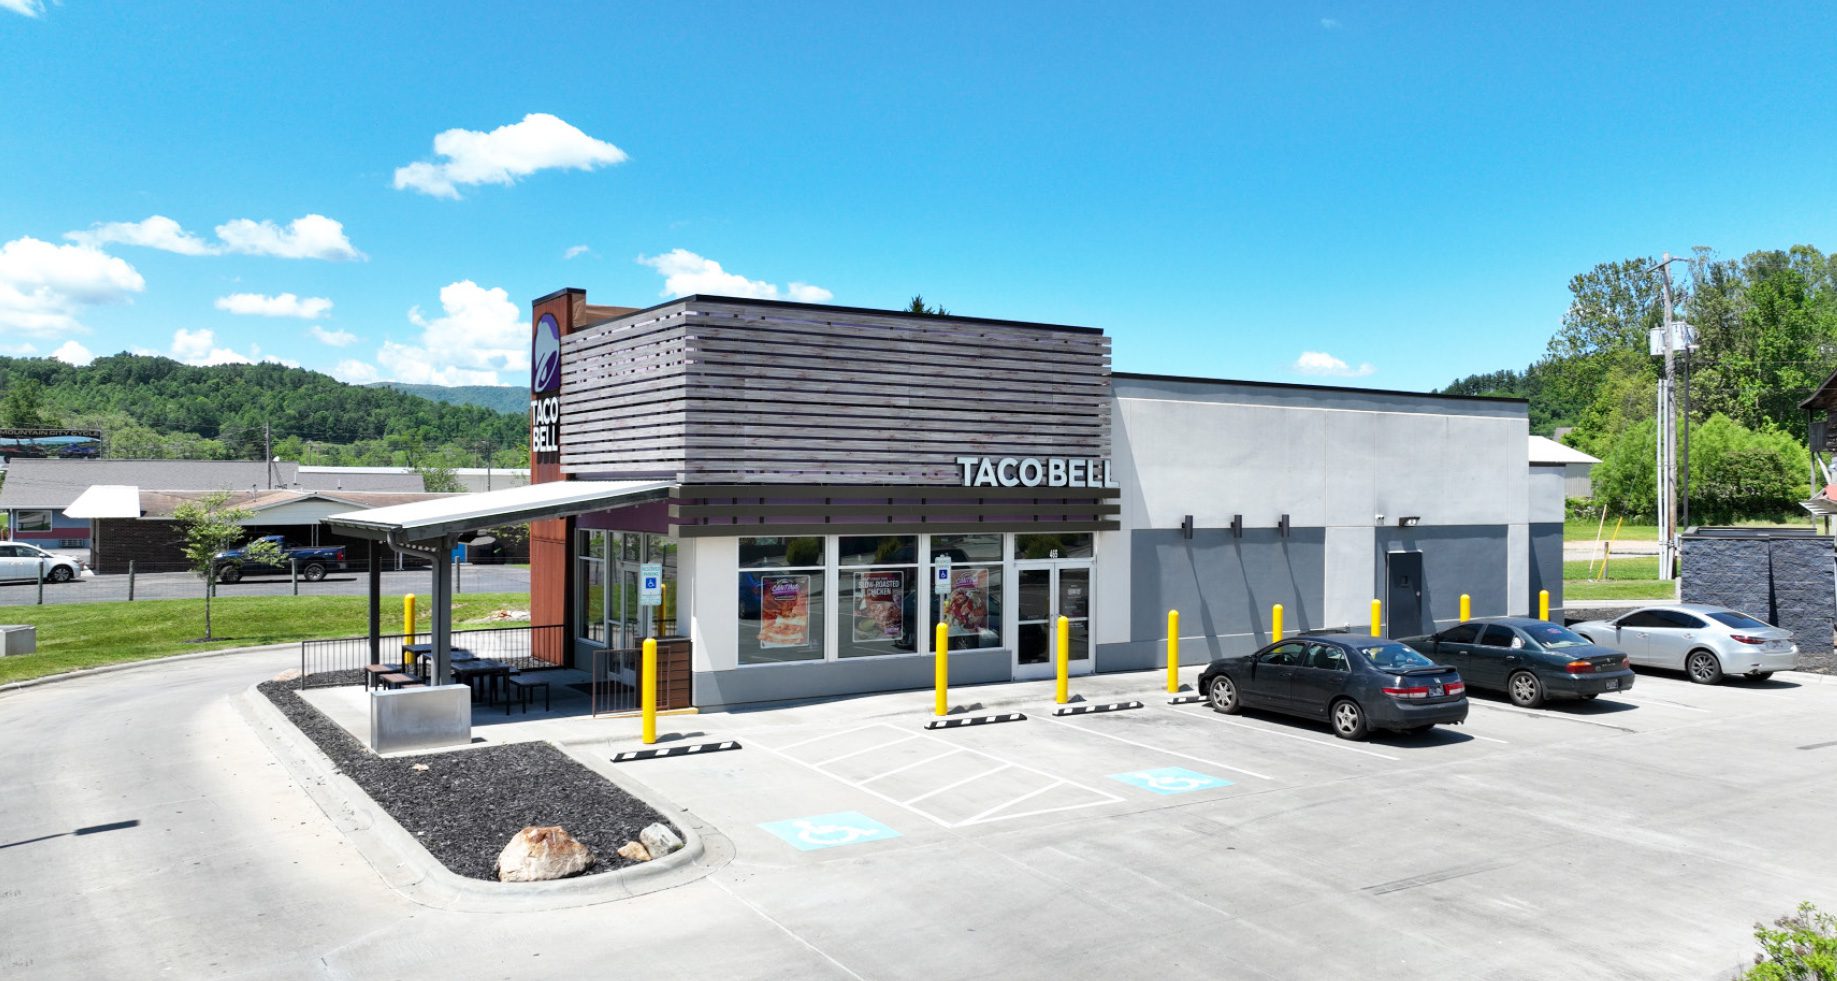 Taco Bell Exterior with covered Patio and Drive Thru